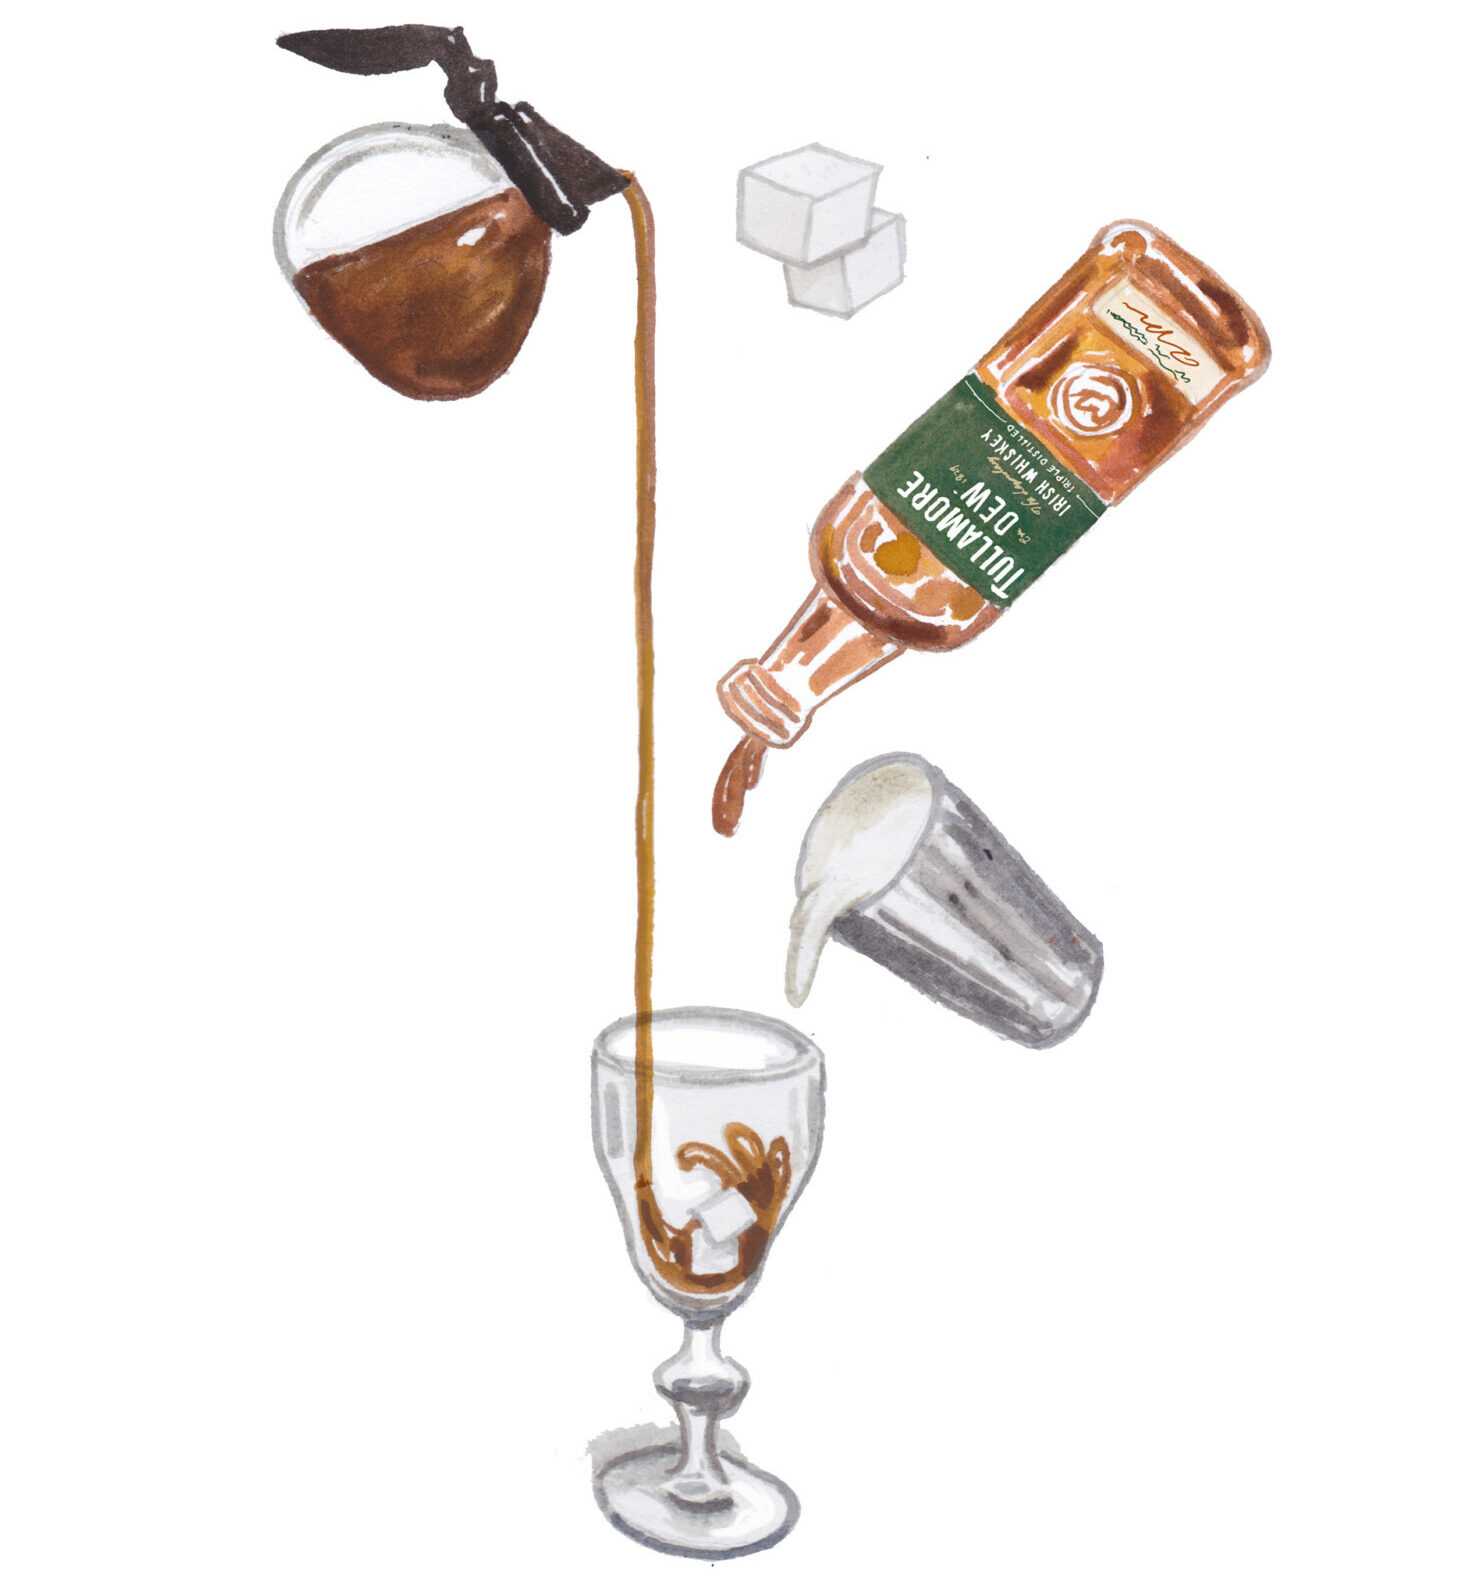 An illustration of the four different ingredients that go into making an Irish Coffee (coffee, two sugar cubes, whiskey, and cream)